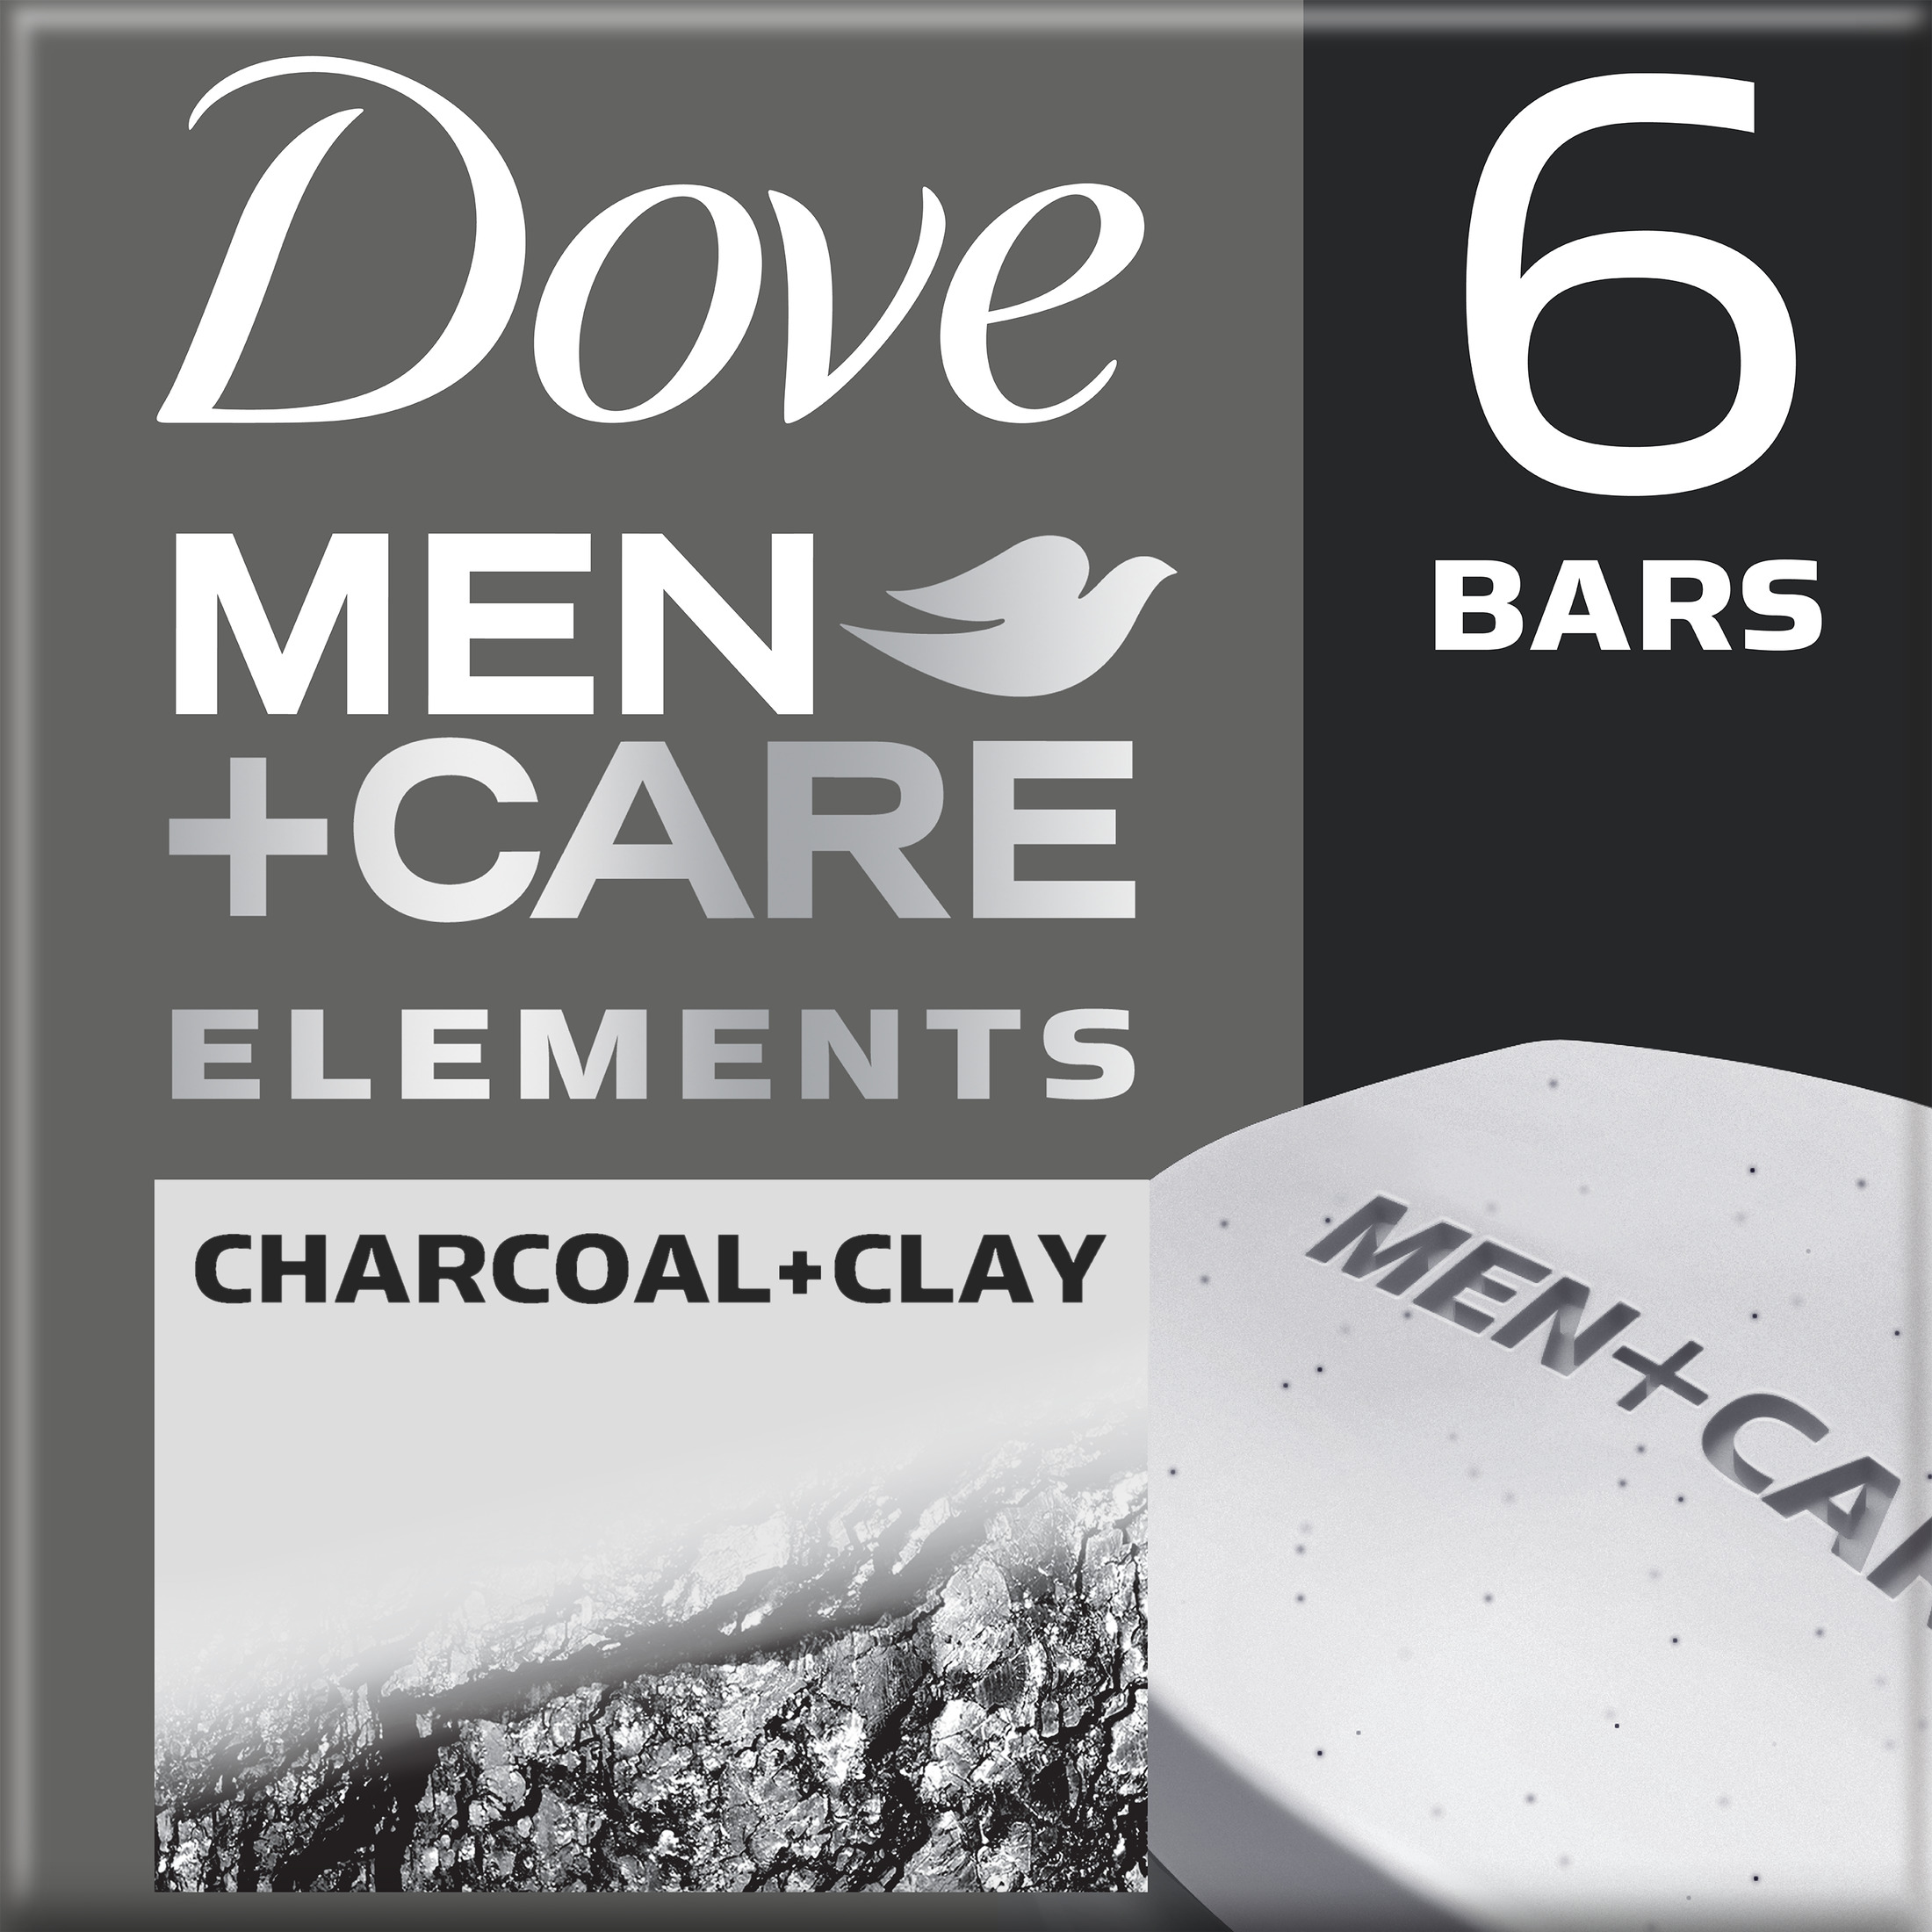 Dove Men+Care Elements Body and Face Bar Charcoal + Clay 3.75 oz, 6 Bar - image 2 of 7